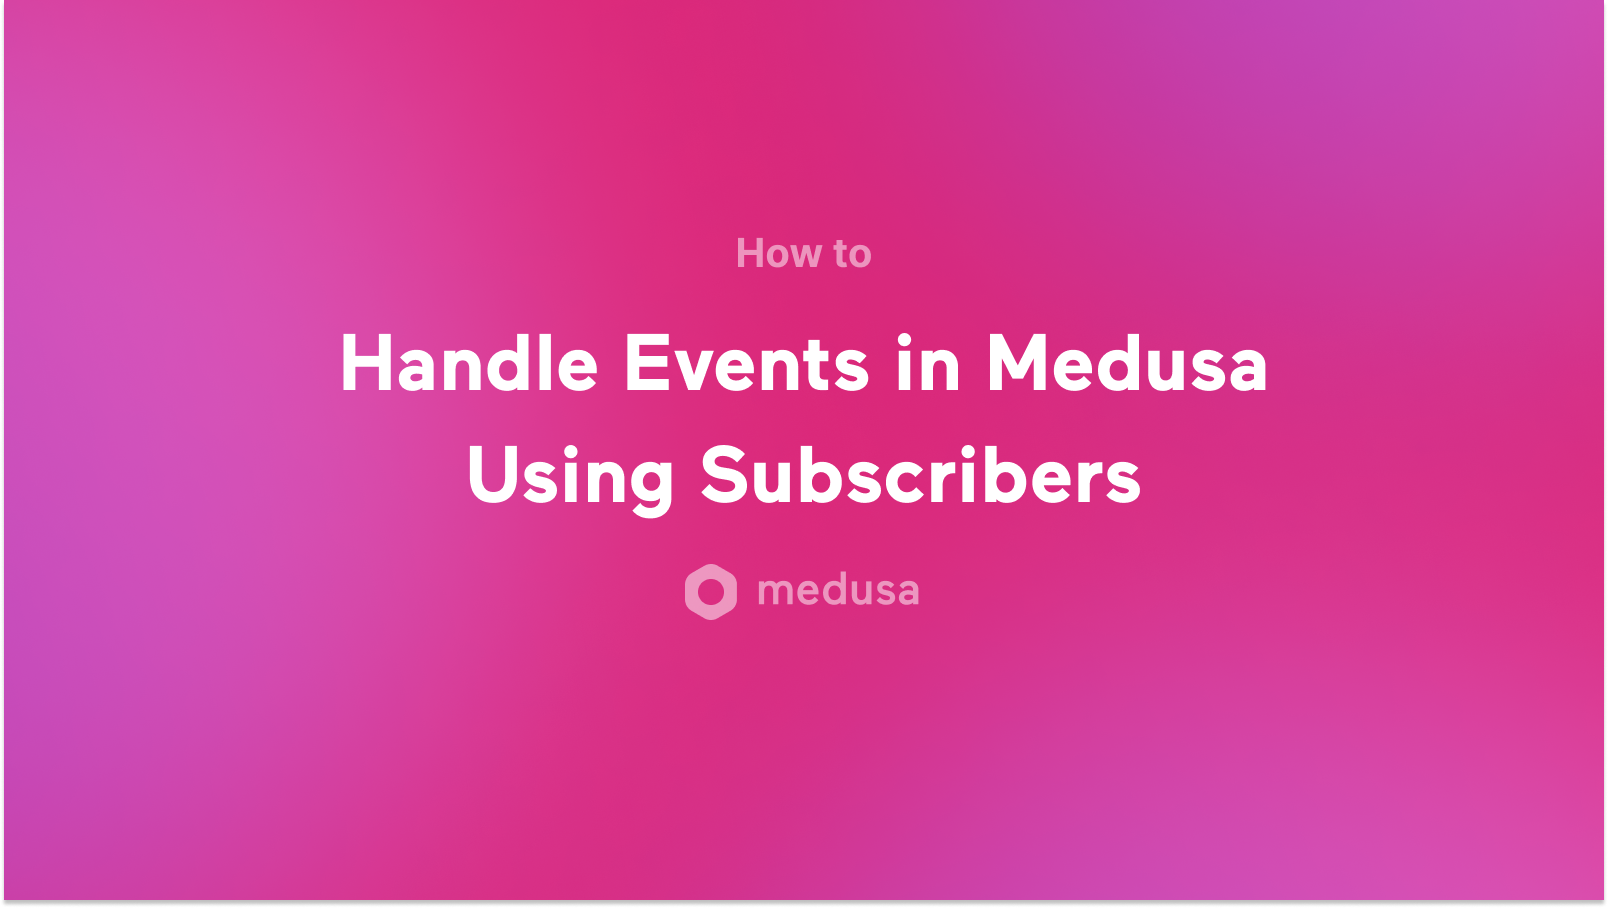 How to Handle Events in Medusa Using Subscribers